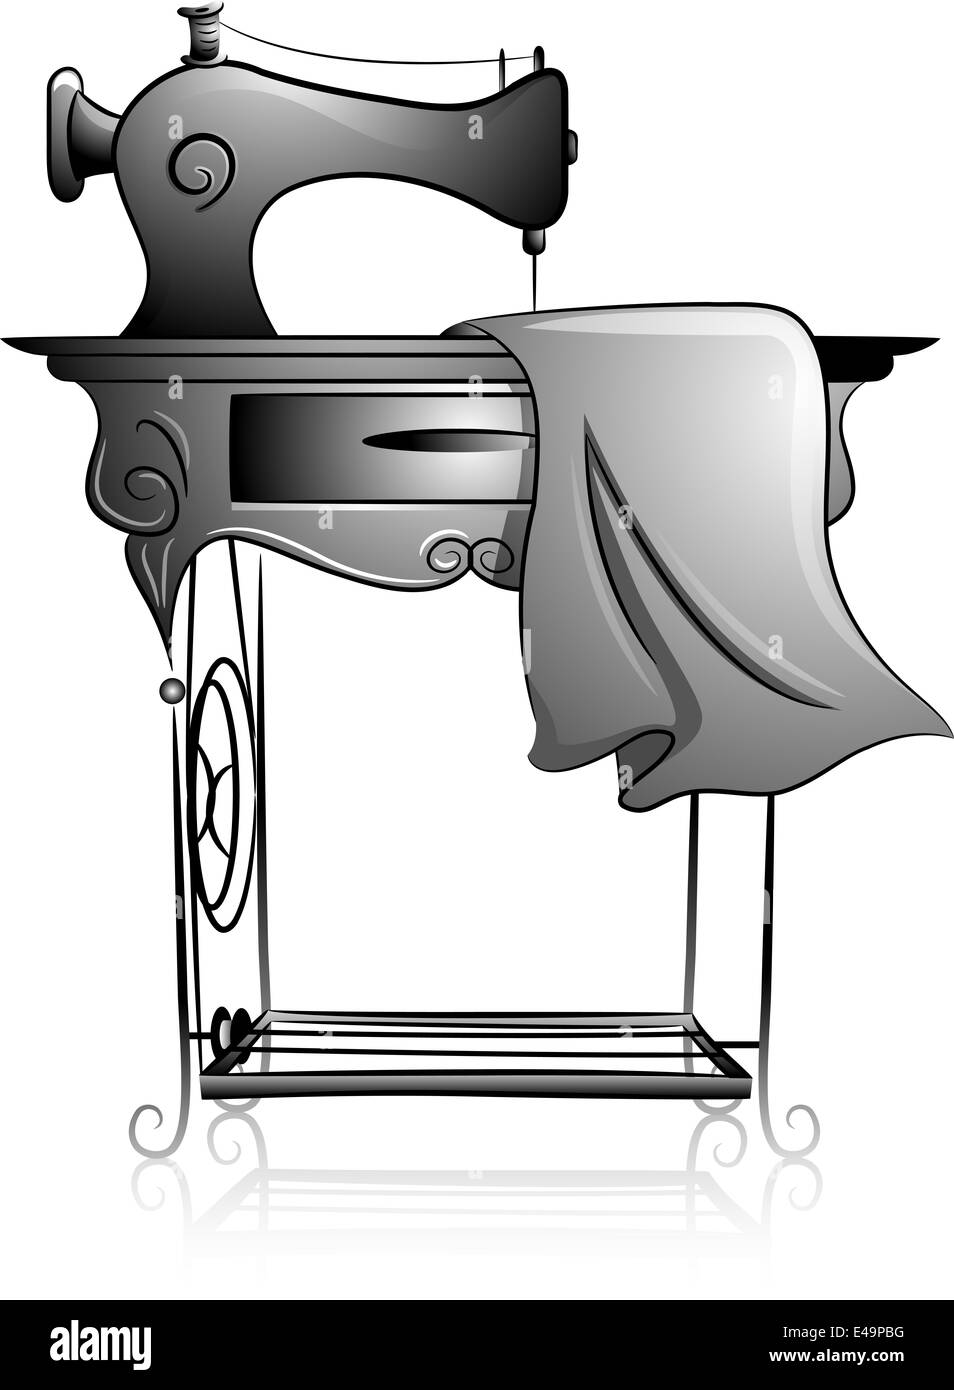 Icon Illustration Featuring a Treadle Sewing Machine Drawn in Black and White Stock Photo